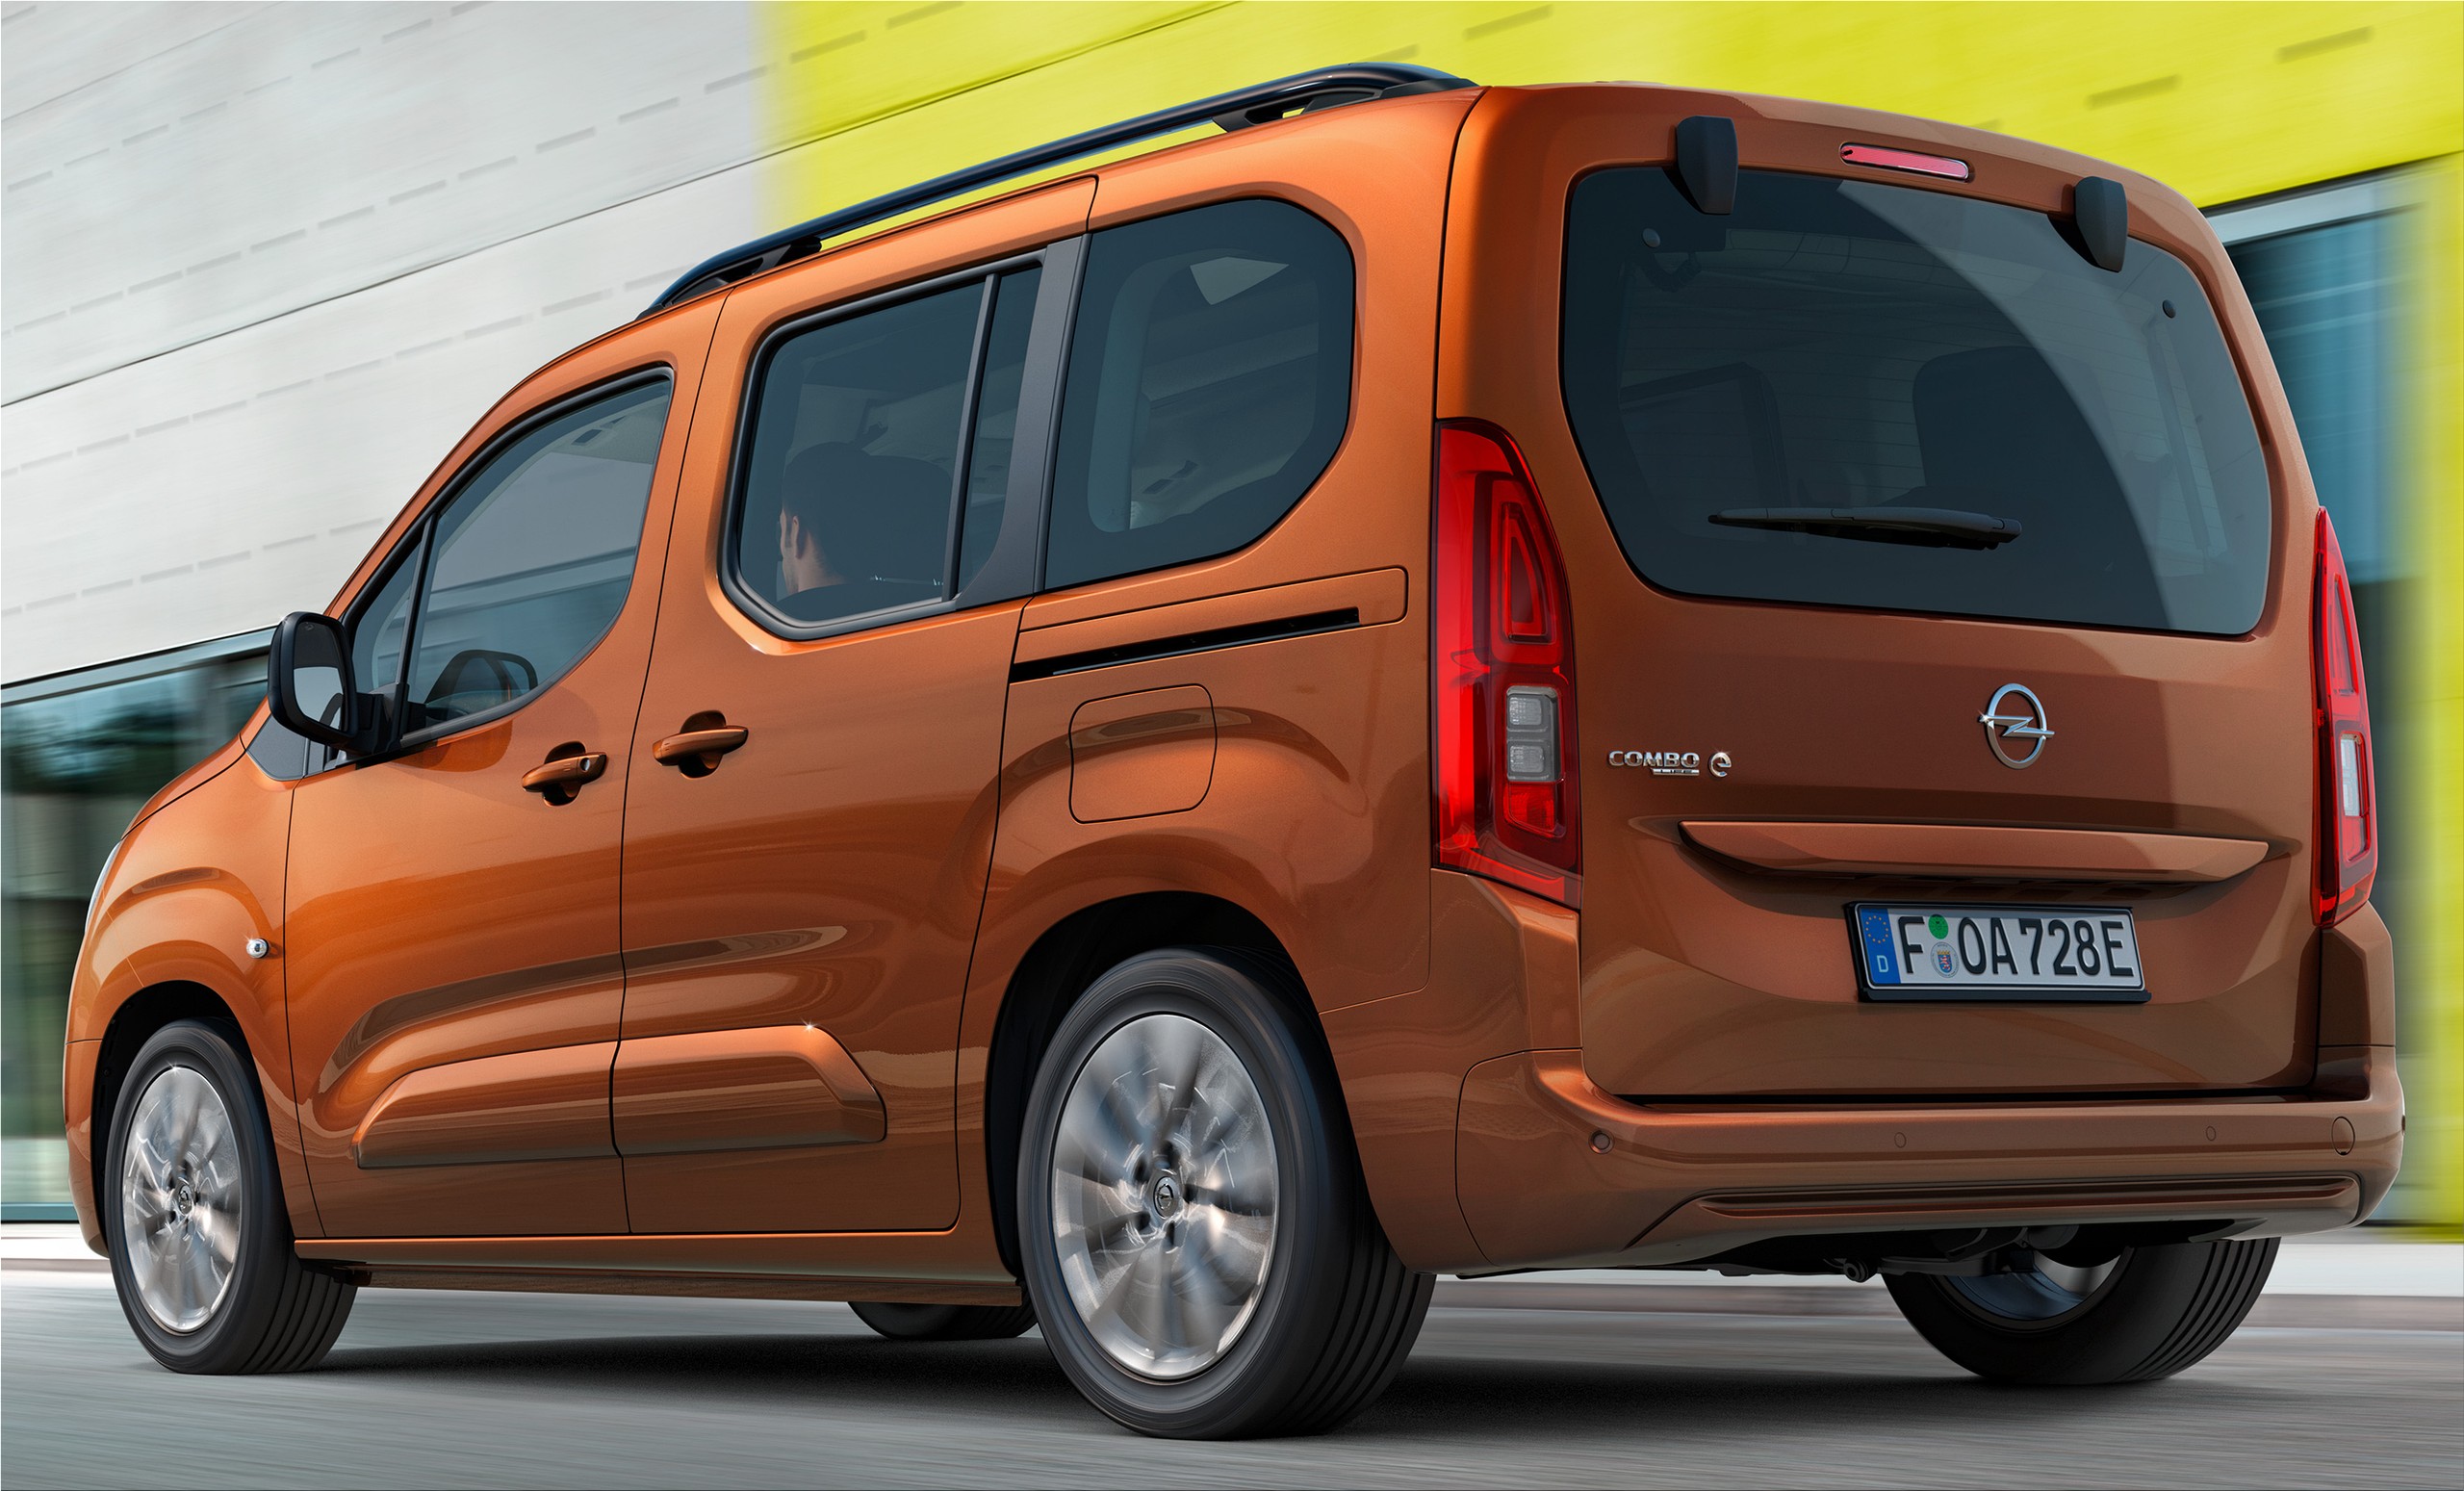 The new Opel Combo-e is a superbly practical electric car